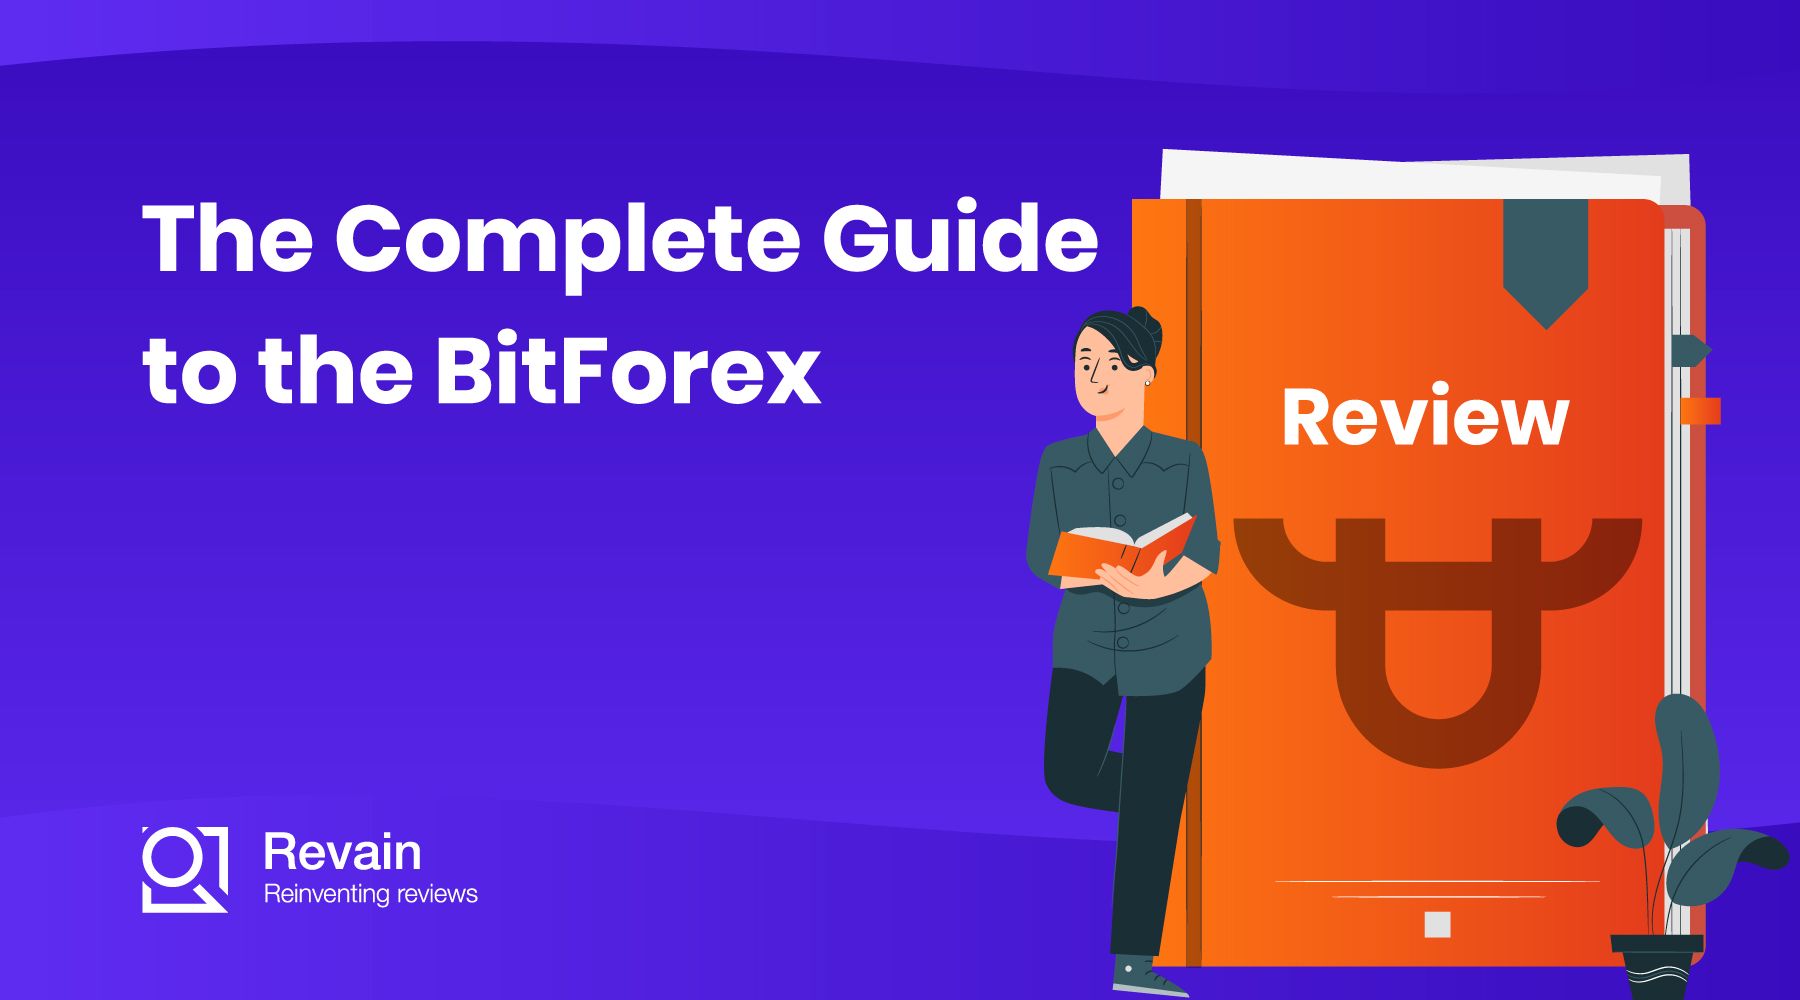 The Complete Guide to the BitForex Exchange